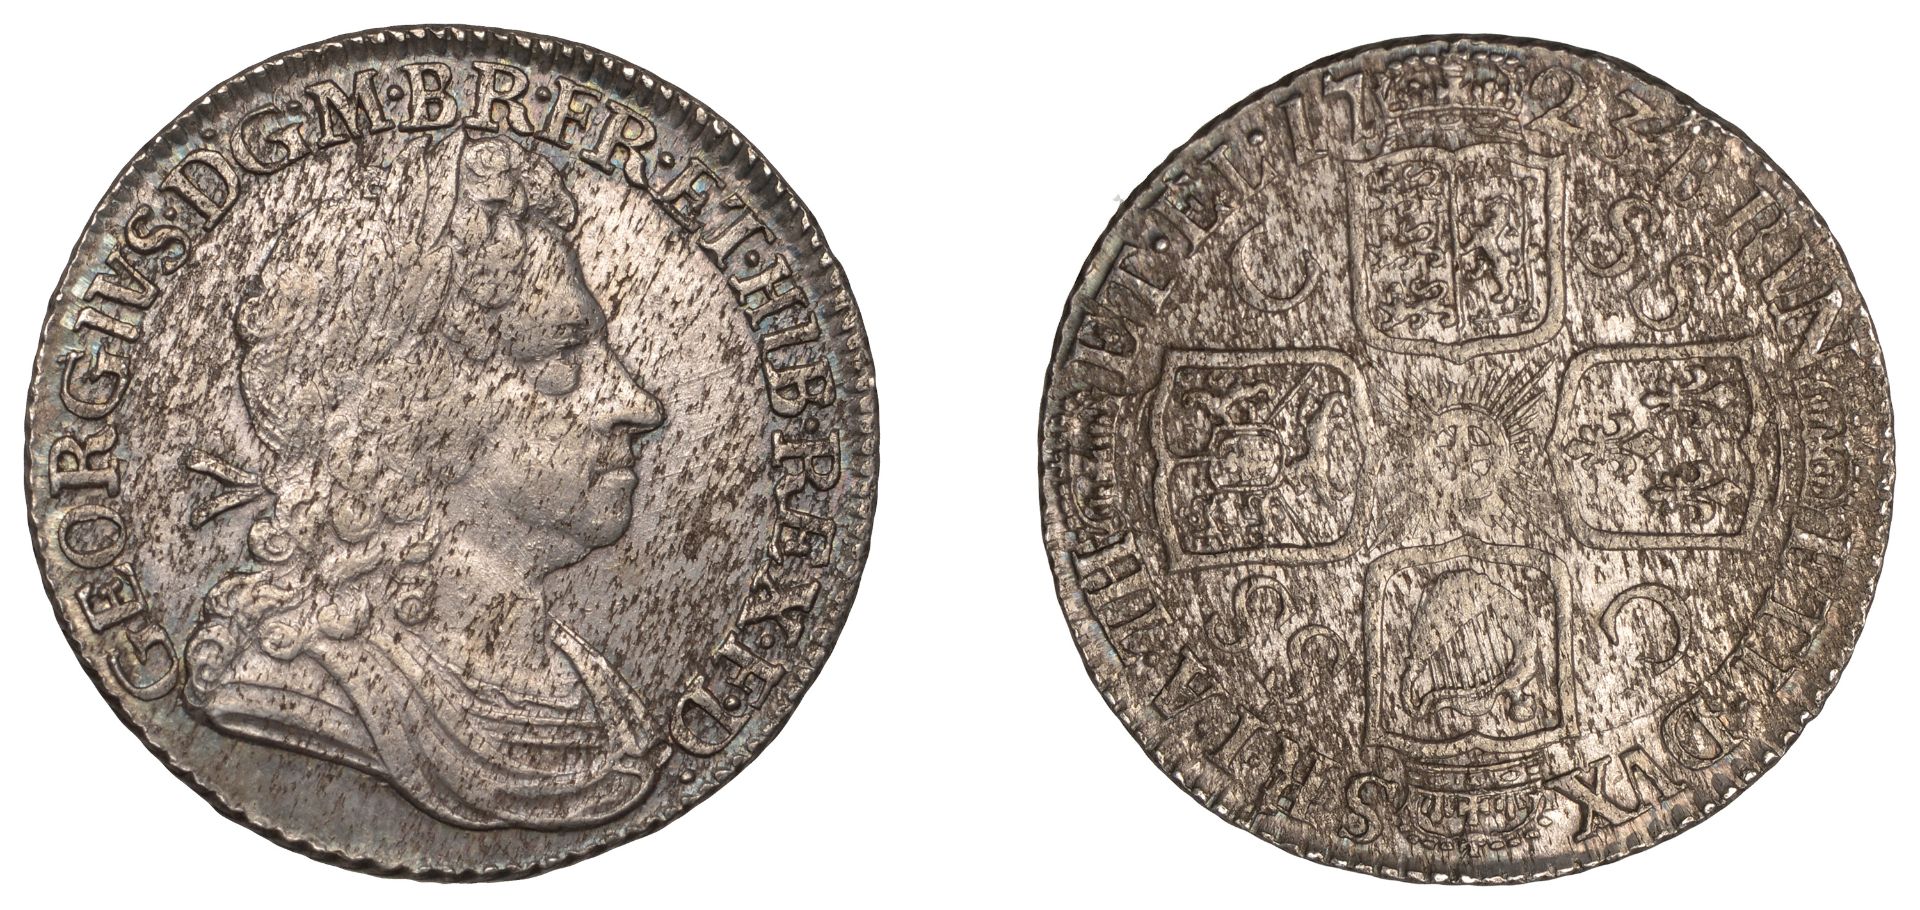 George I (1714-1727), Shilling, 1723 ssc, first bust (ESC 1586; S 3647). Heavy flecking, oth...